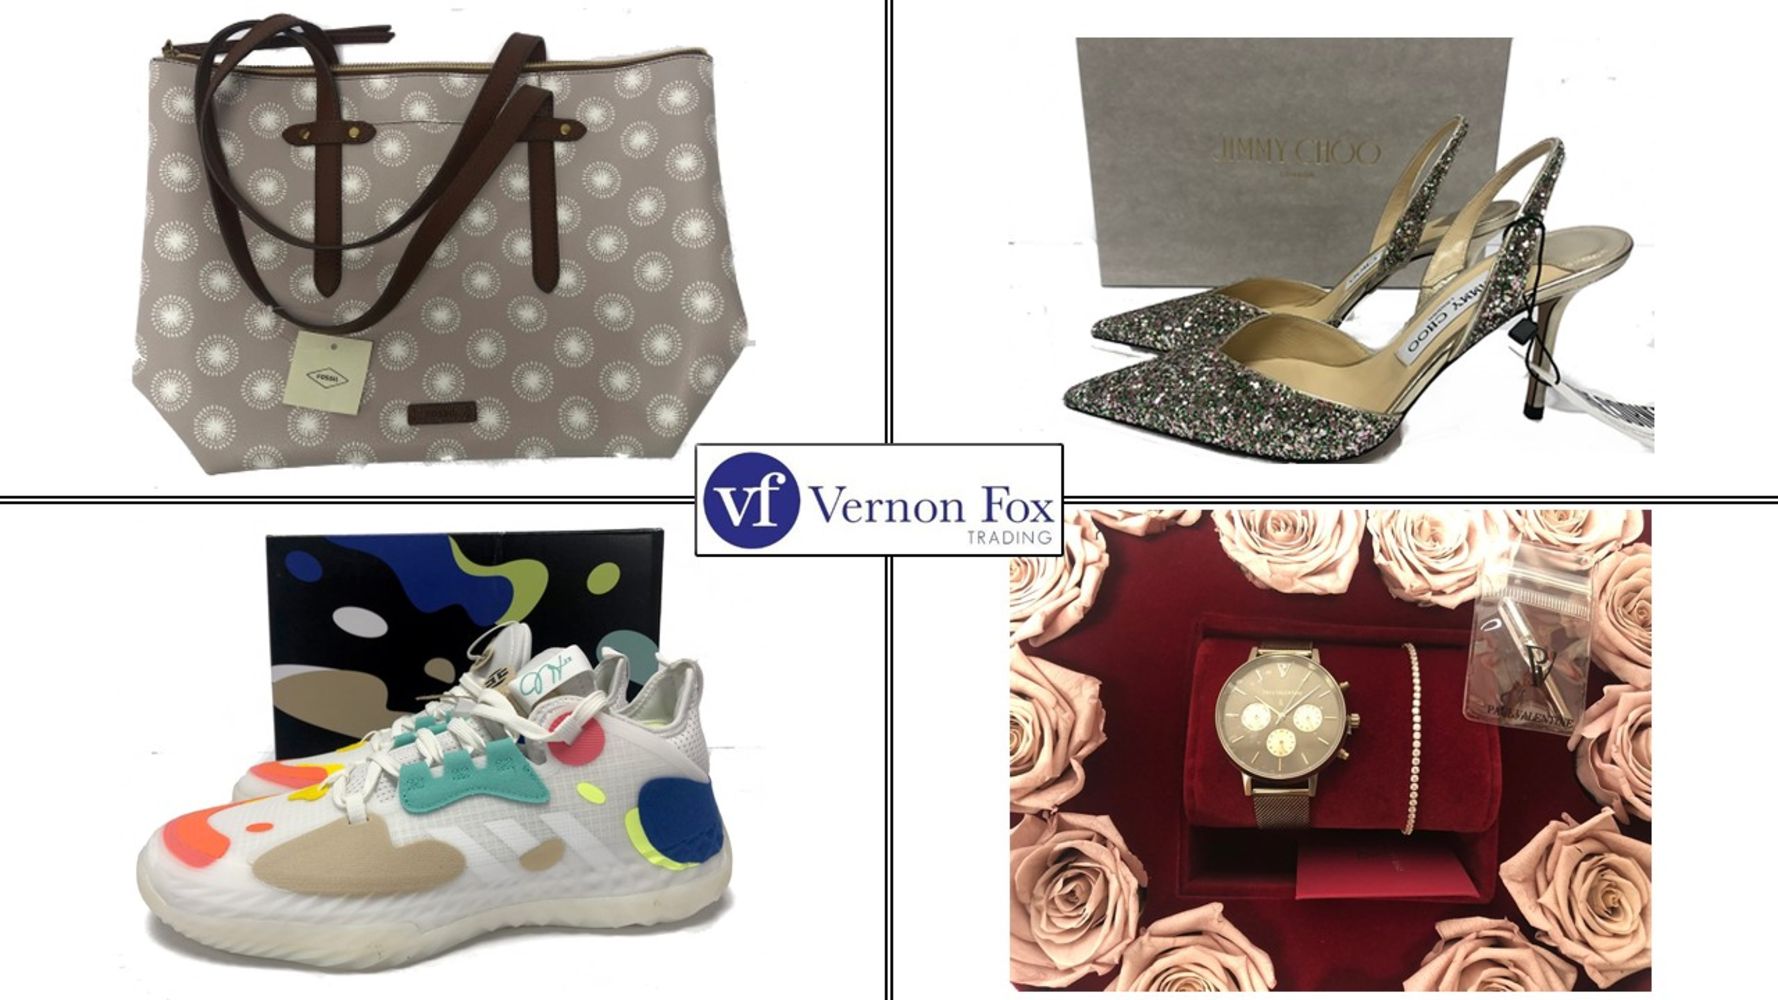 TIMED ONLINE AUCTION: Huge Collection of Fashion and Accessories to include Bags, Clothes, Shoes, Trainers, Jewellery and more. FREE UK DELIVERY